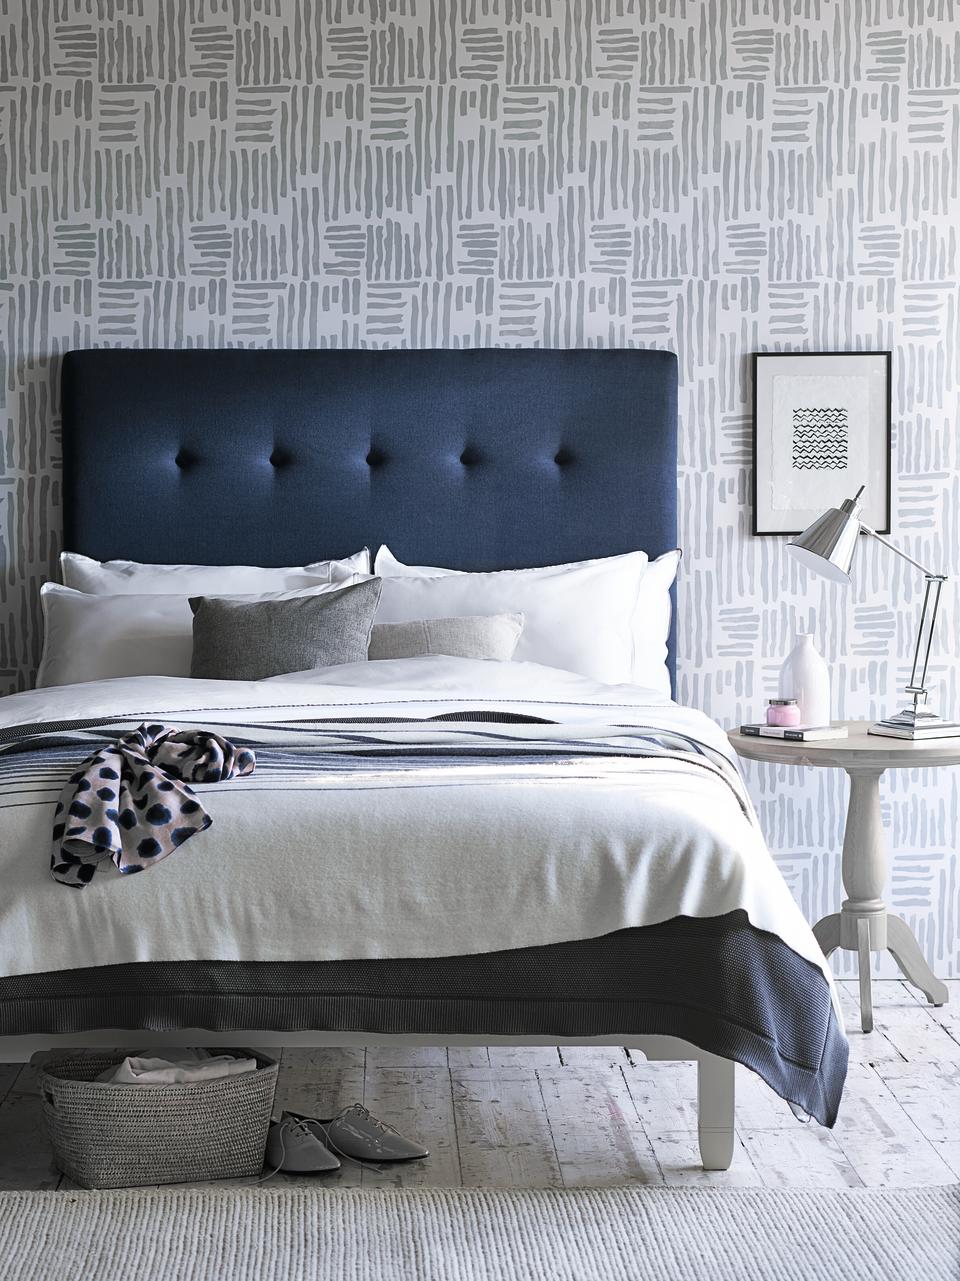 <p> Want to keep your walls neutral? We love this modern linear wallpaper in soft gray, it sets the tone for the rest of the scheme and makes it easy to use the same shade throughout with bedding and accessories. </p> <p> Then, choose a navy-colored bed as the focal point. Blue and gray are a good combination and you can play with different tones for extra interest.&#xA0; </p>